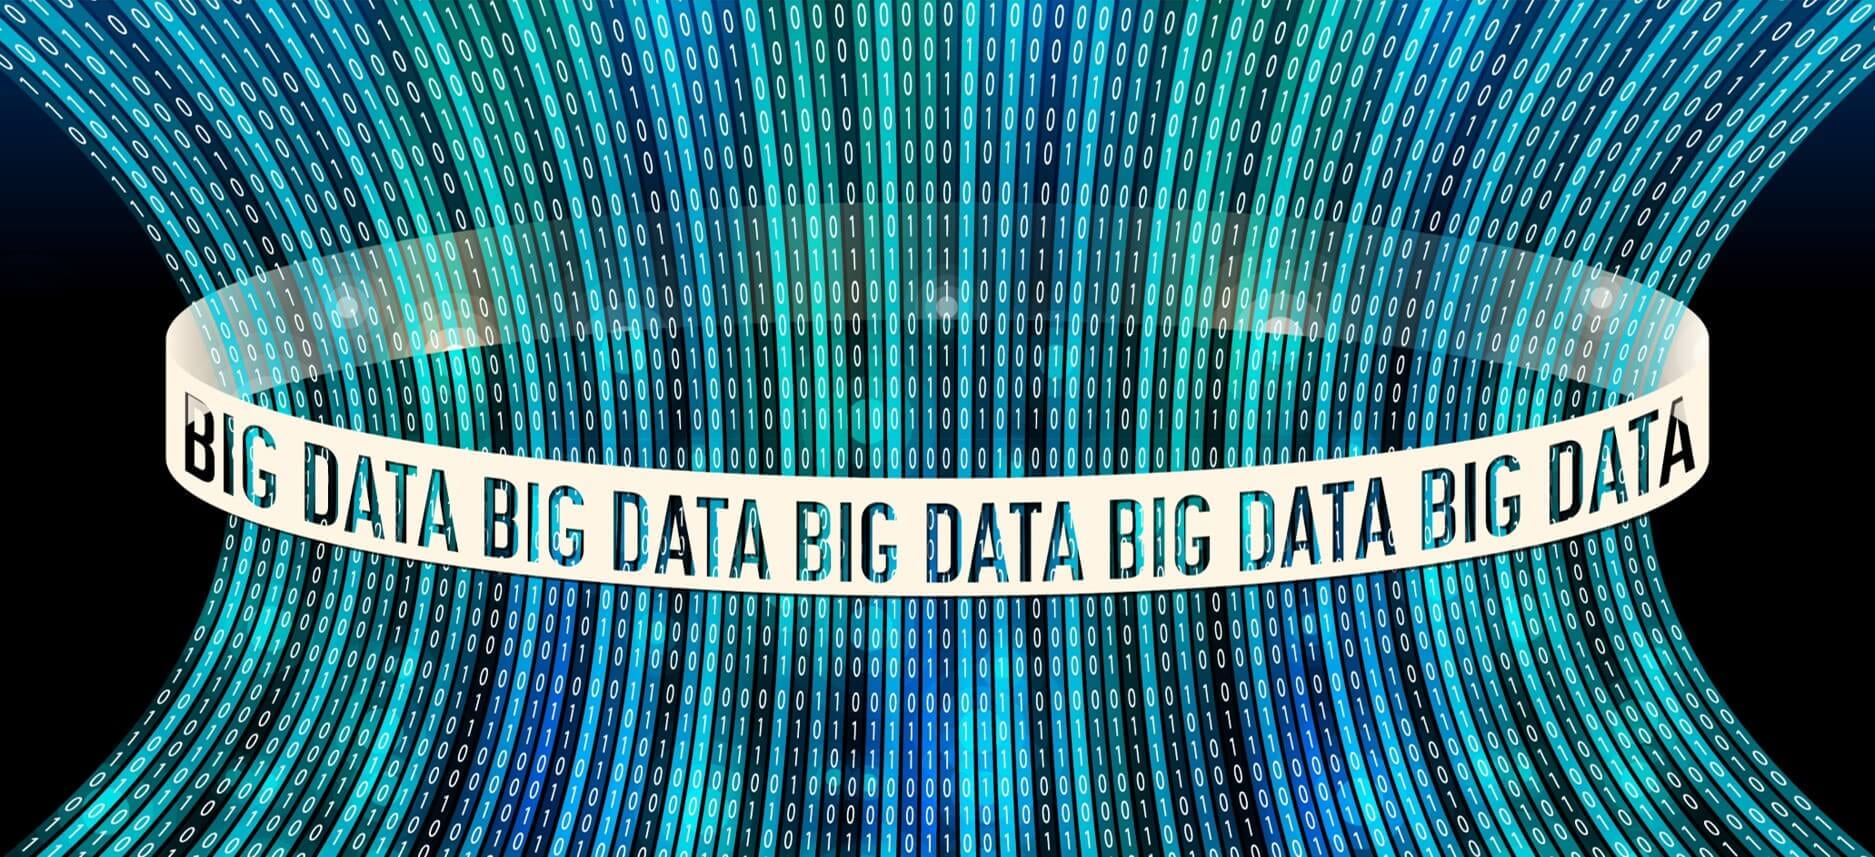 Why Big Data is a Human Rights Concern